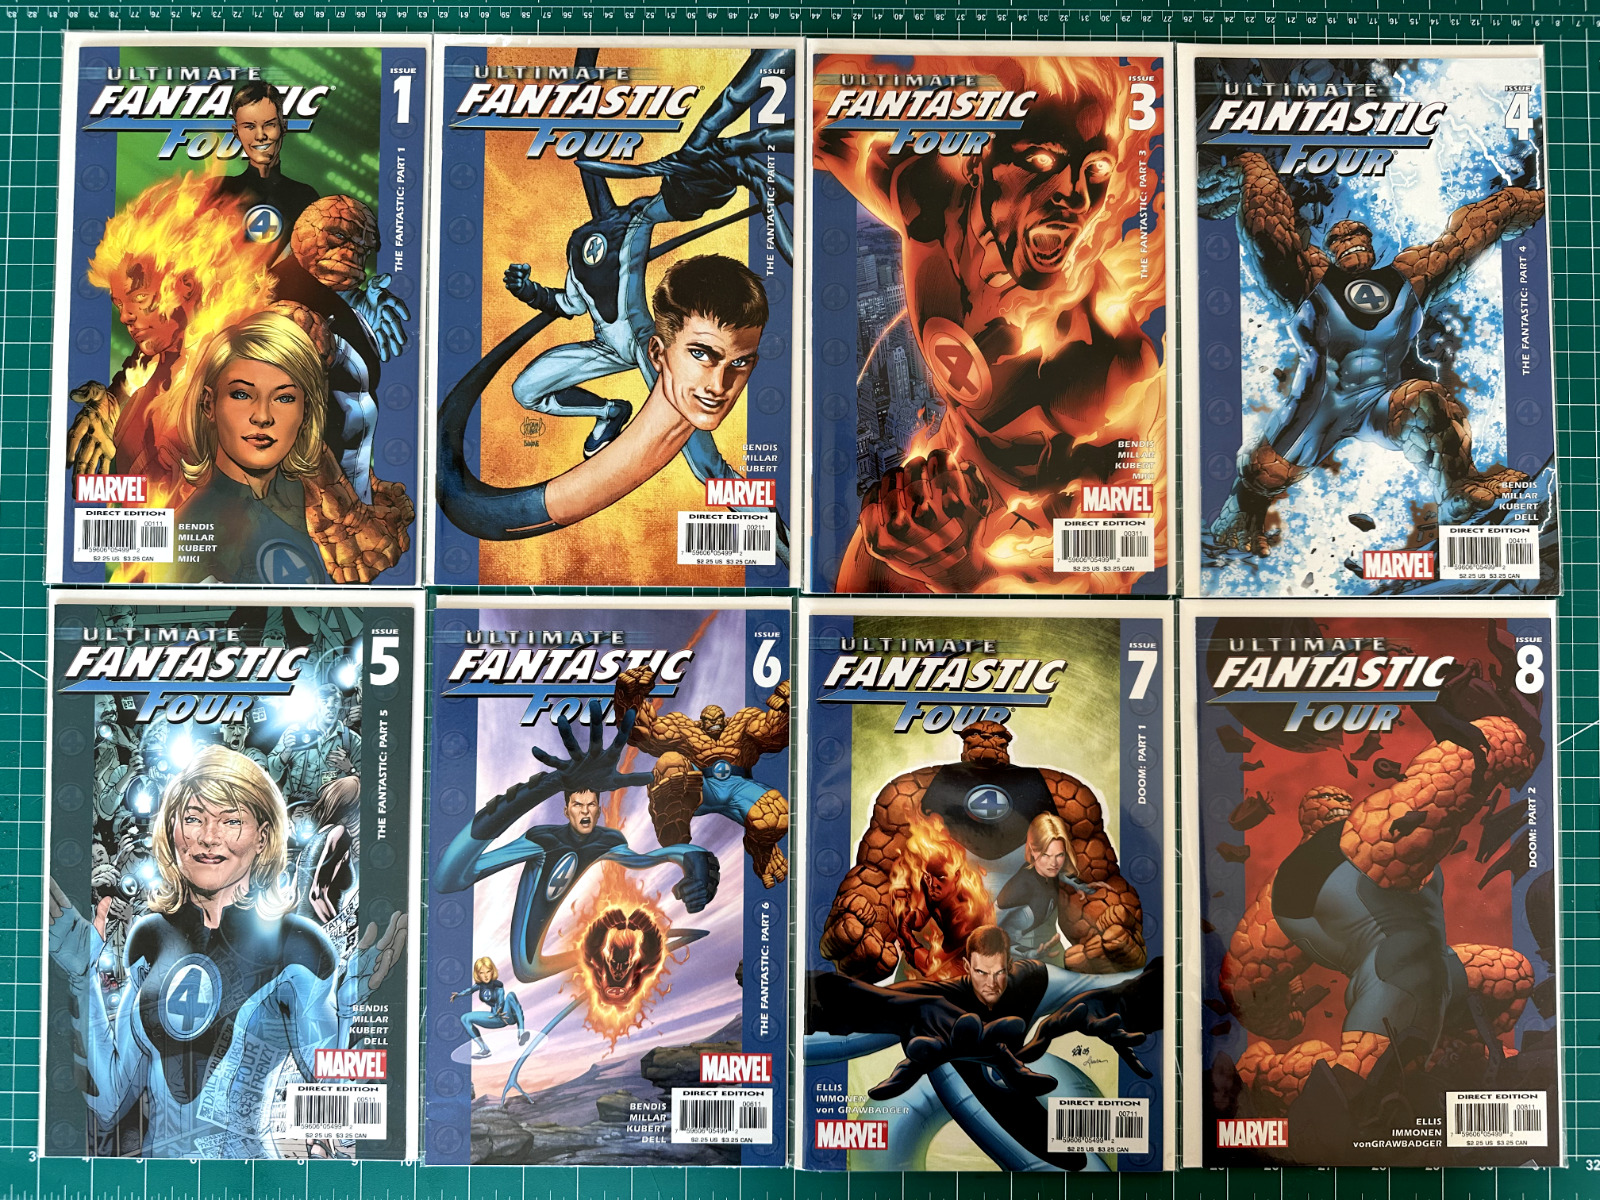 ULTIMATE FANTASTIC FOUR # 1 - 53 COMPLETE + VARIANTS + ANNUALS - MARVEL ZOMBIES